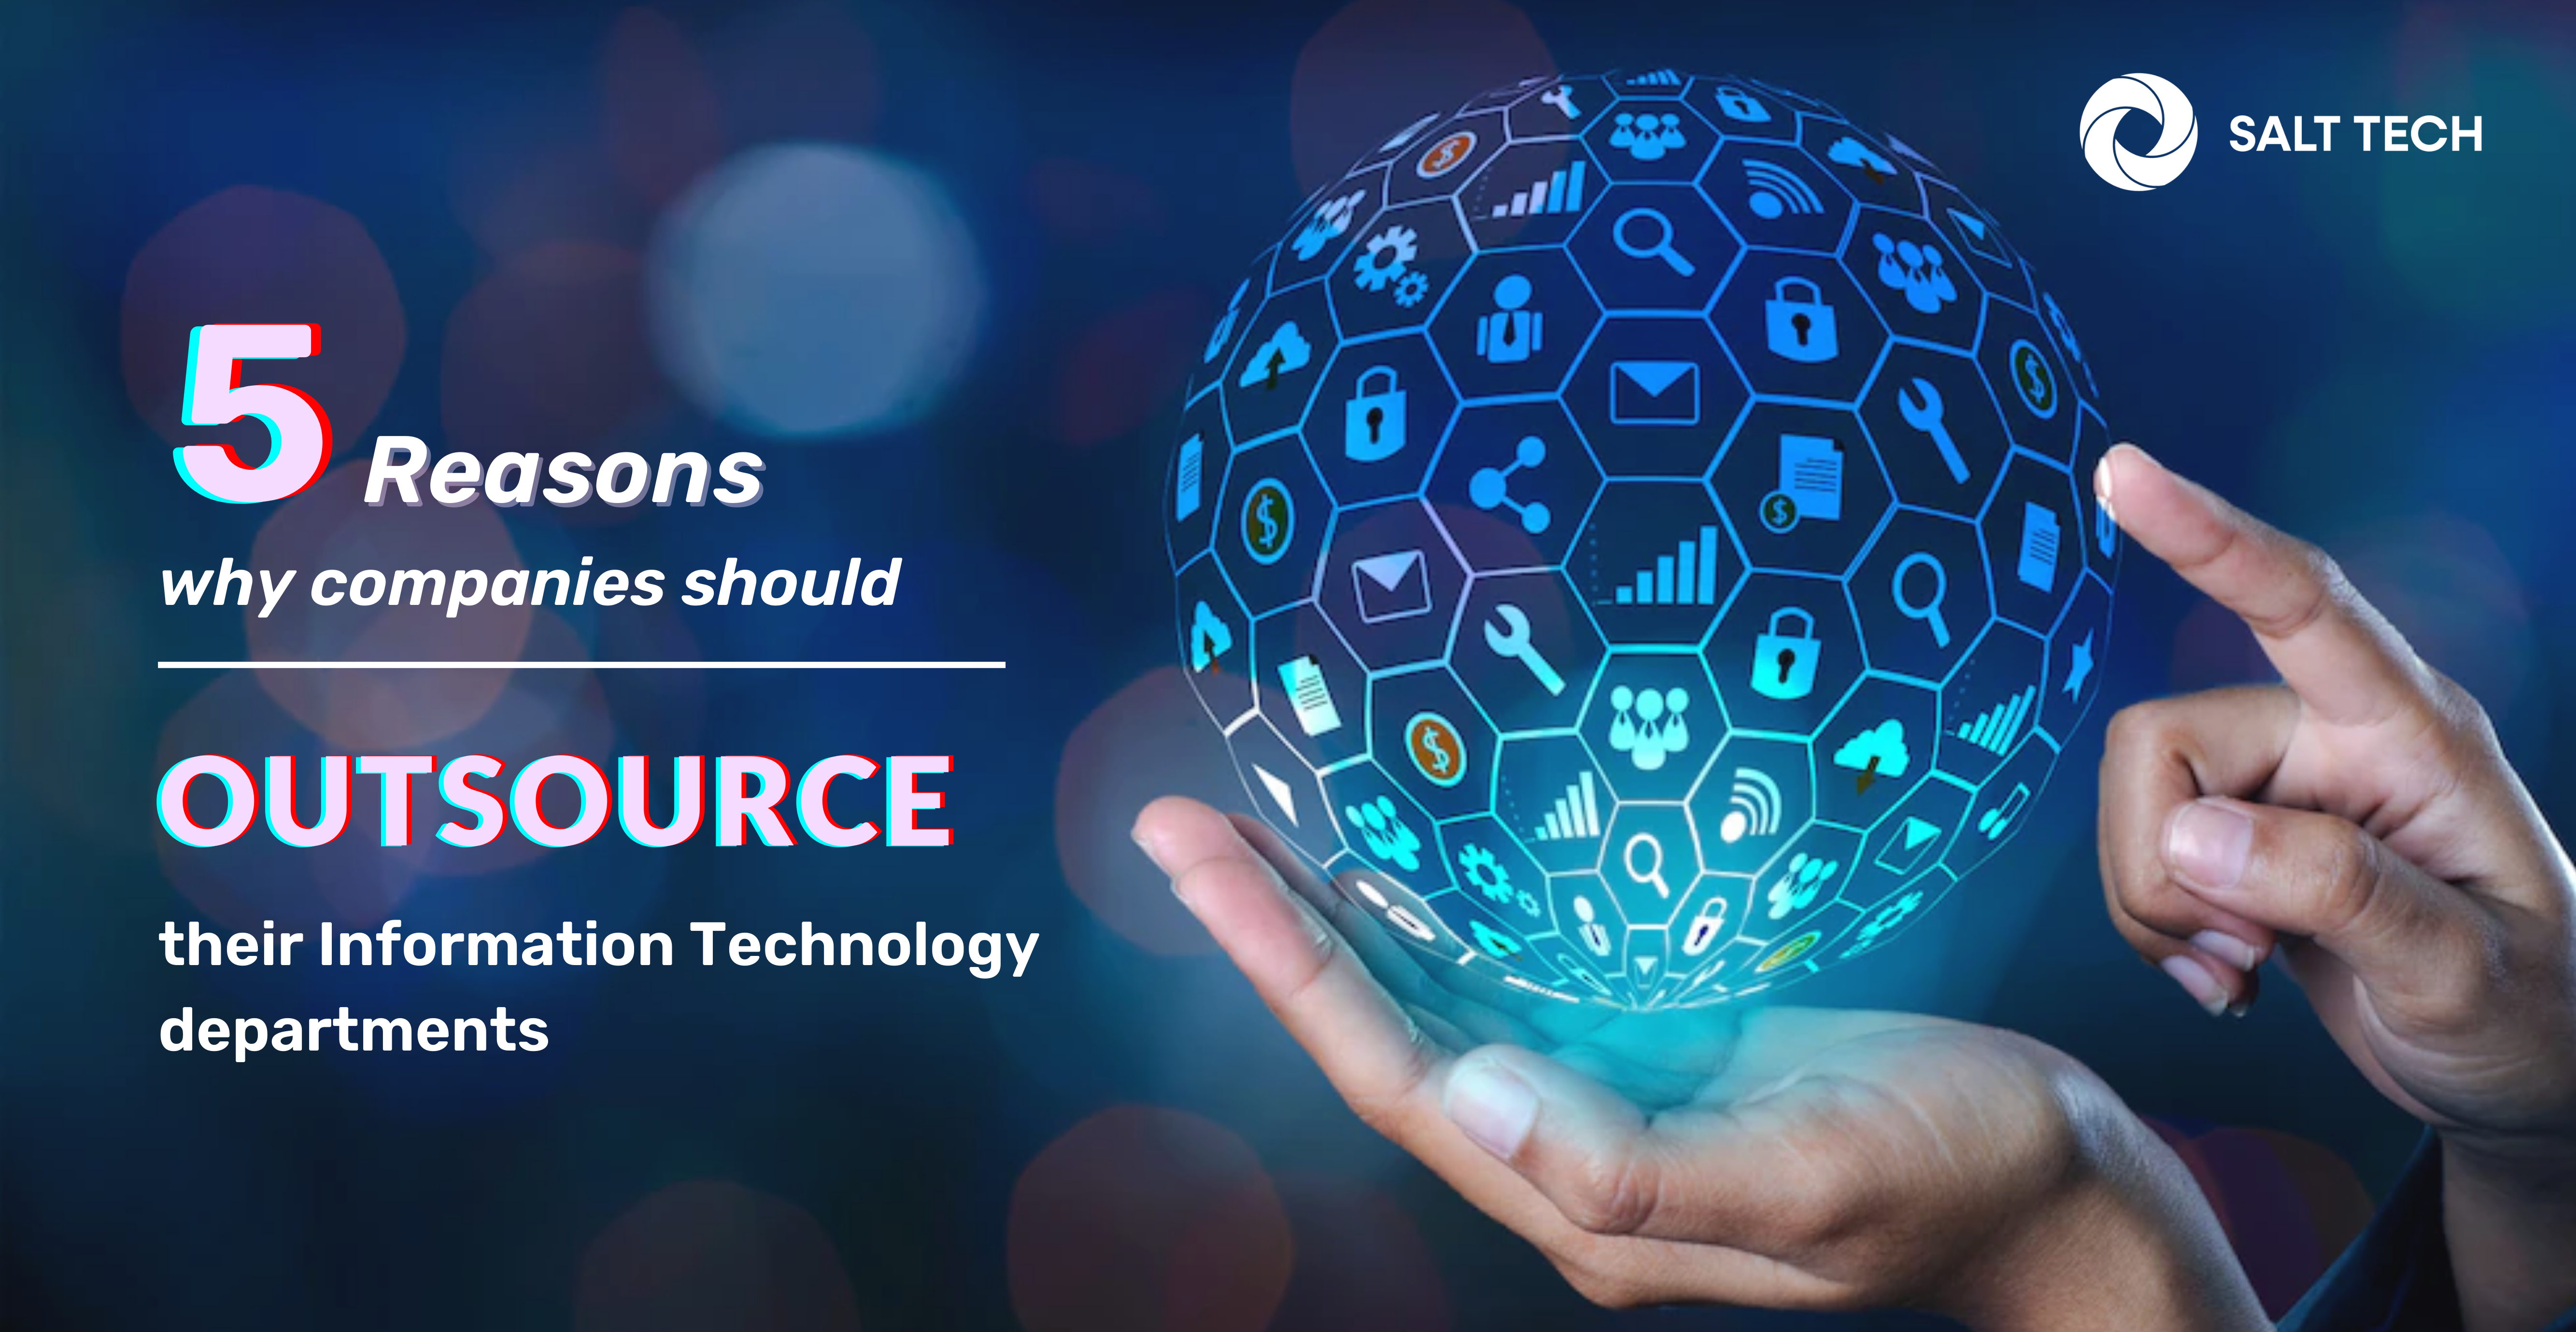 SALT TECH-5 Reasons Why Companies Should Outsource Their Information Technology (IT) Departments